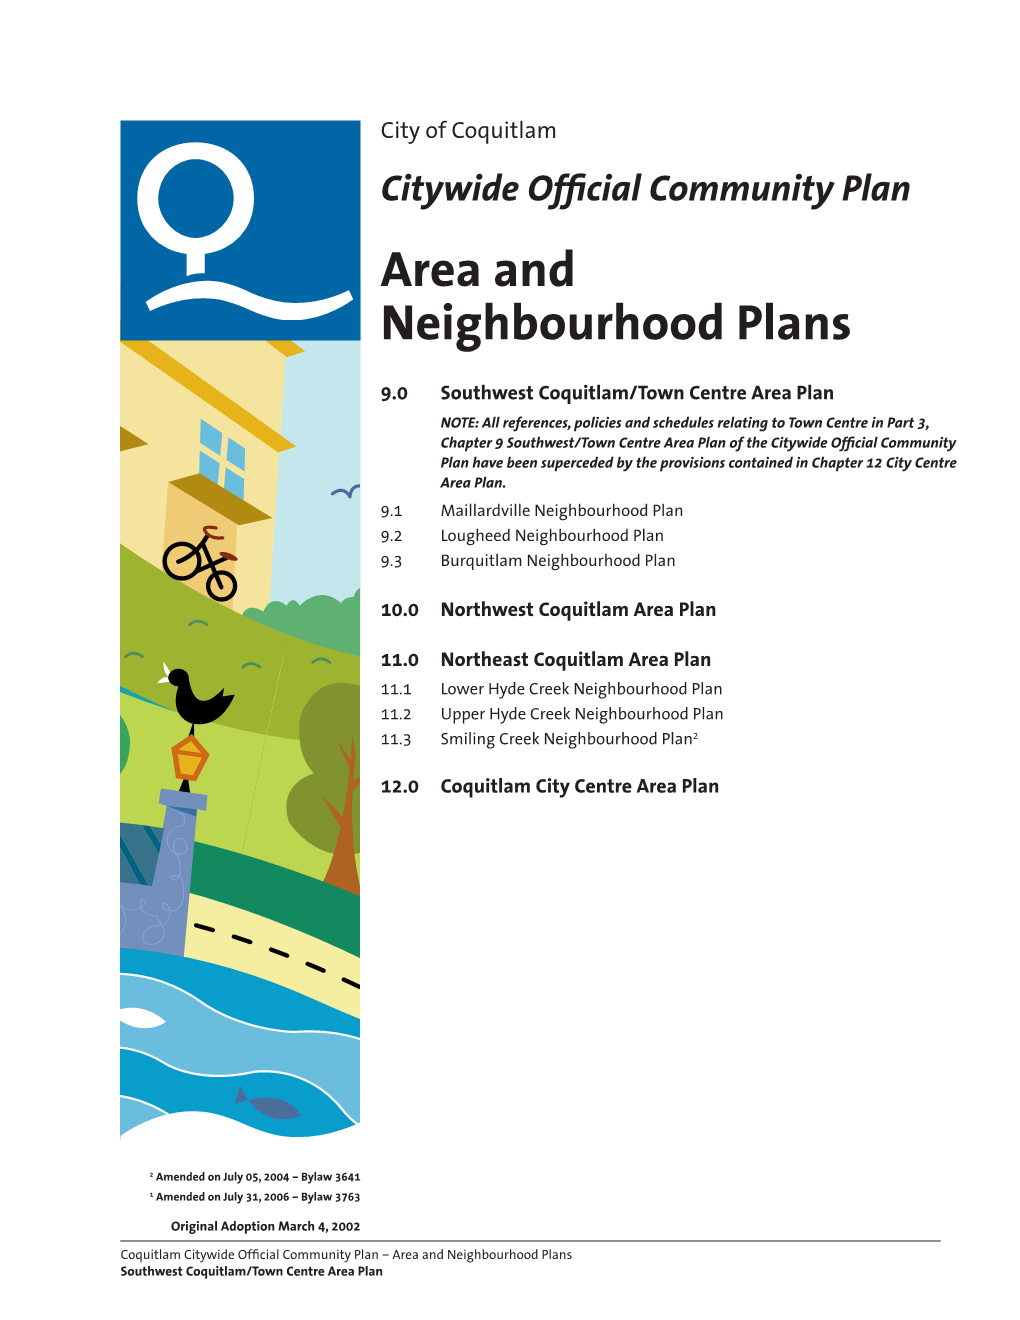 Citywide Official Community Plan Area and Neighbourhood Plans